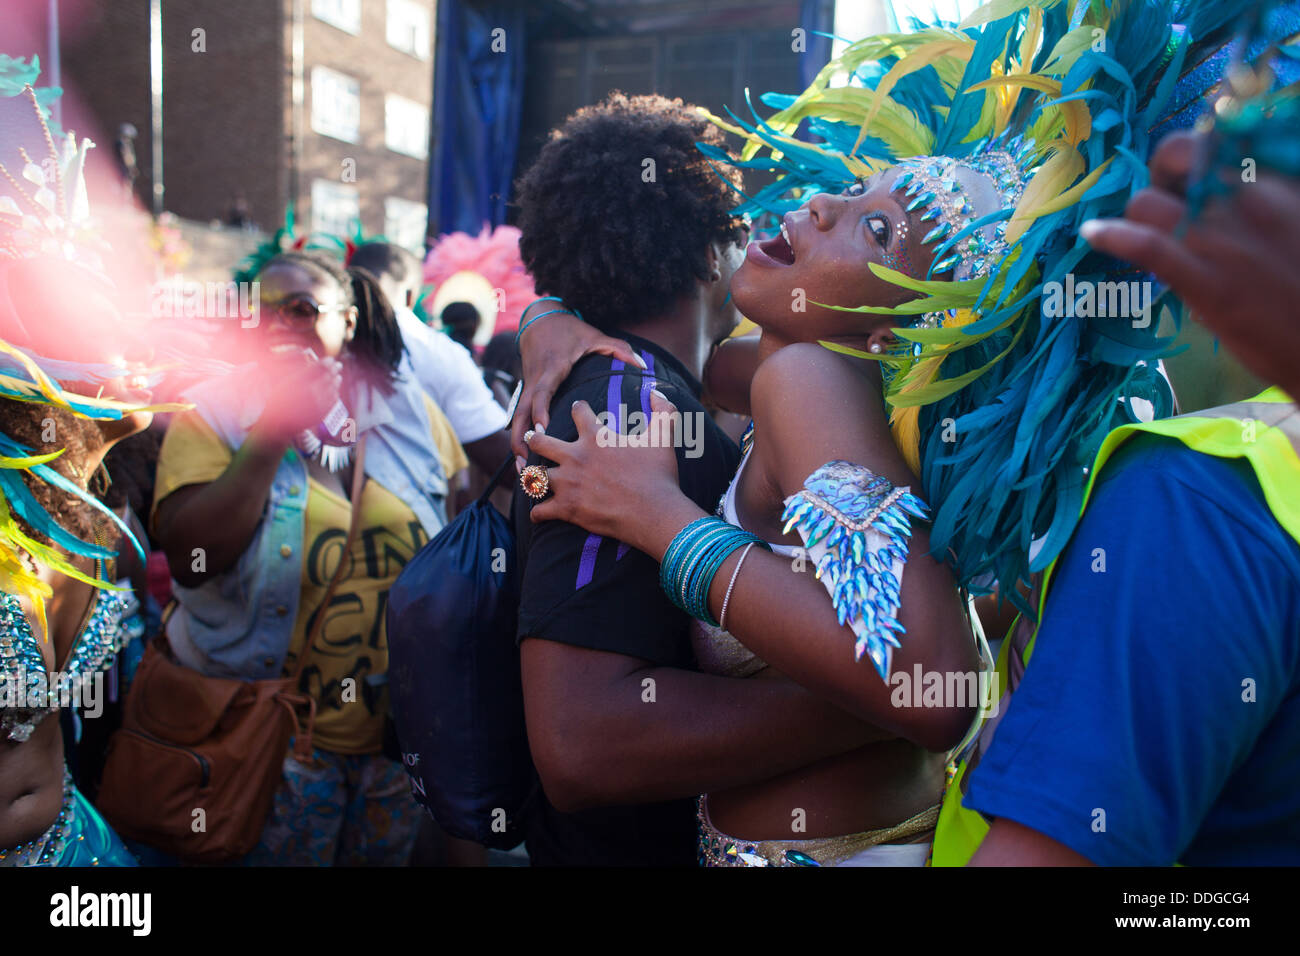 A black dancer dressed in colorful feather outfit and a skimpy bikini dance with a passing by man in the dying sunlight. Stock Photo